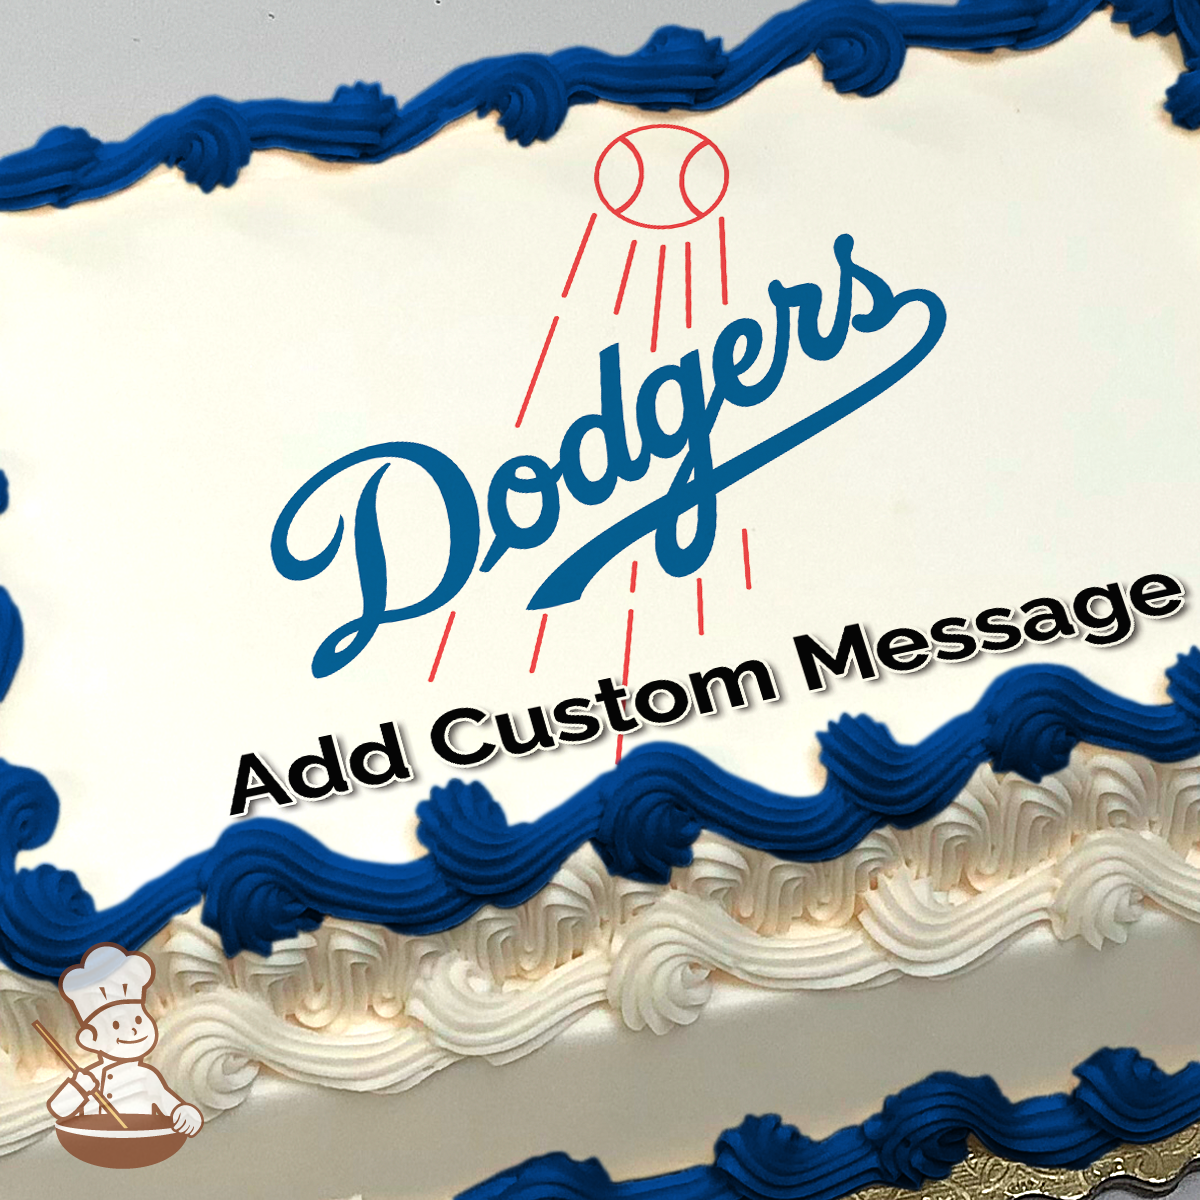 Planning a birthday surprise for - Los Angeles Dodgers